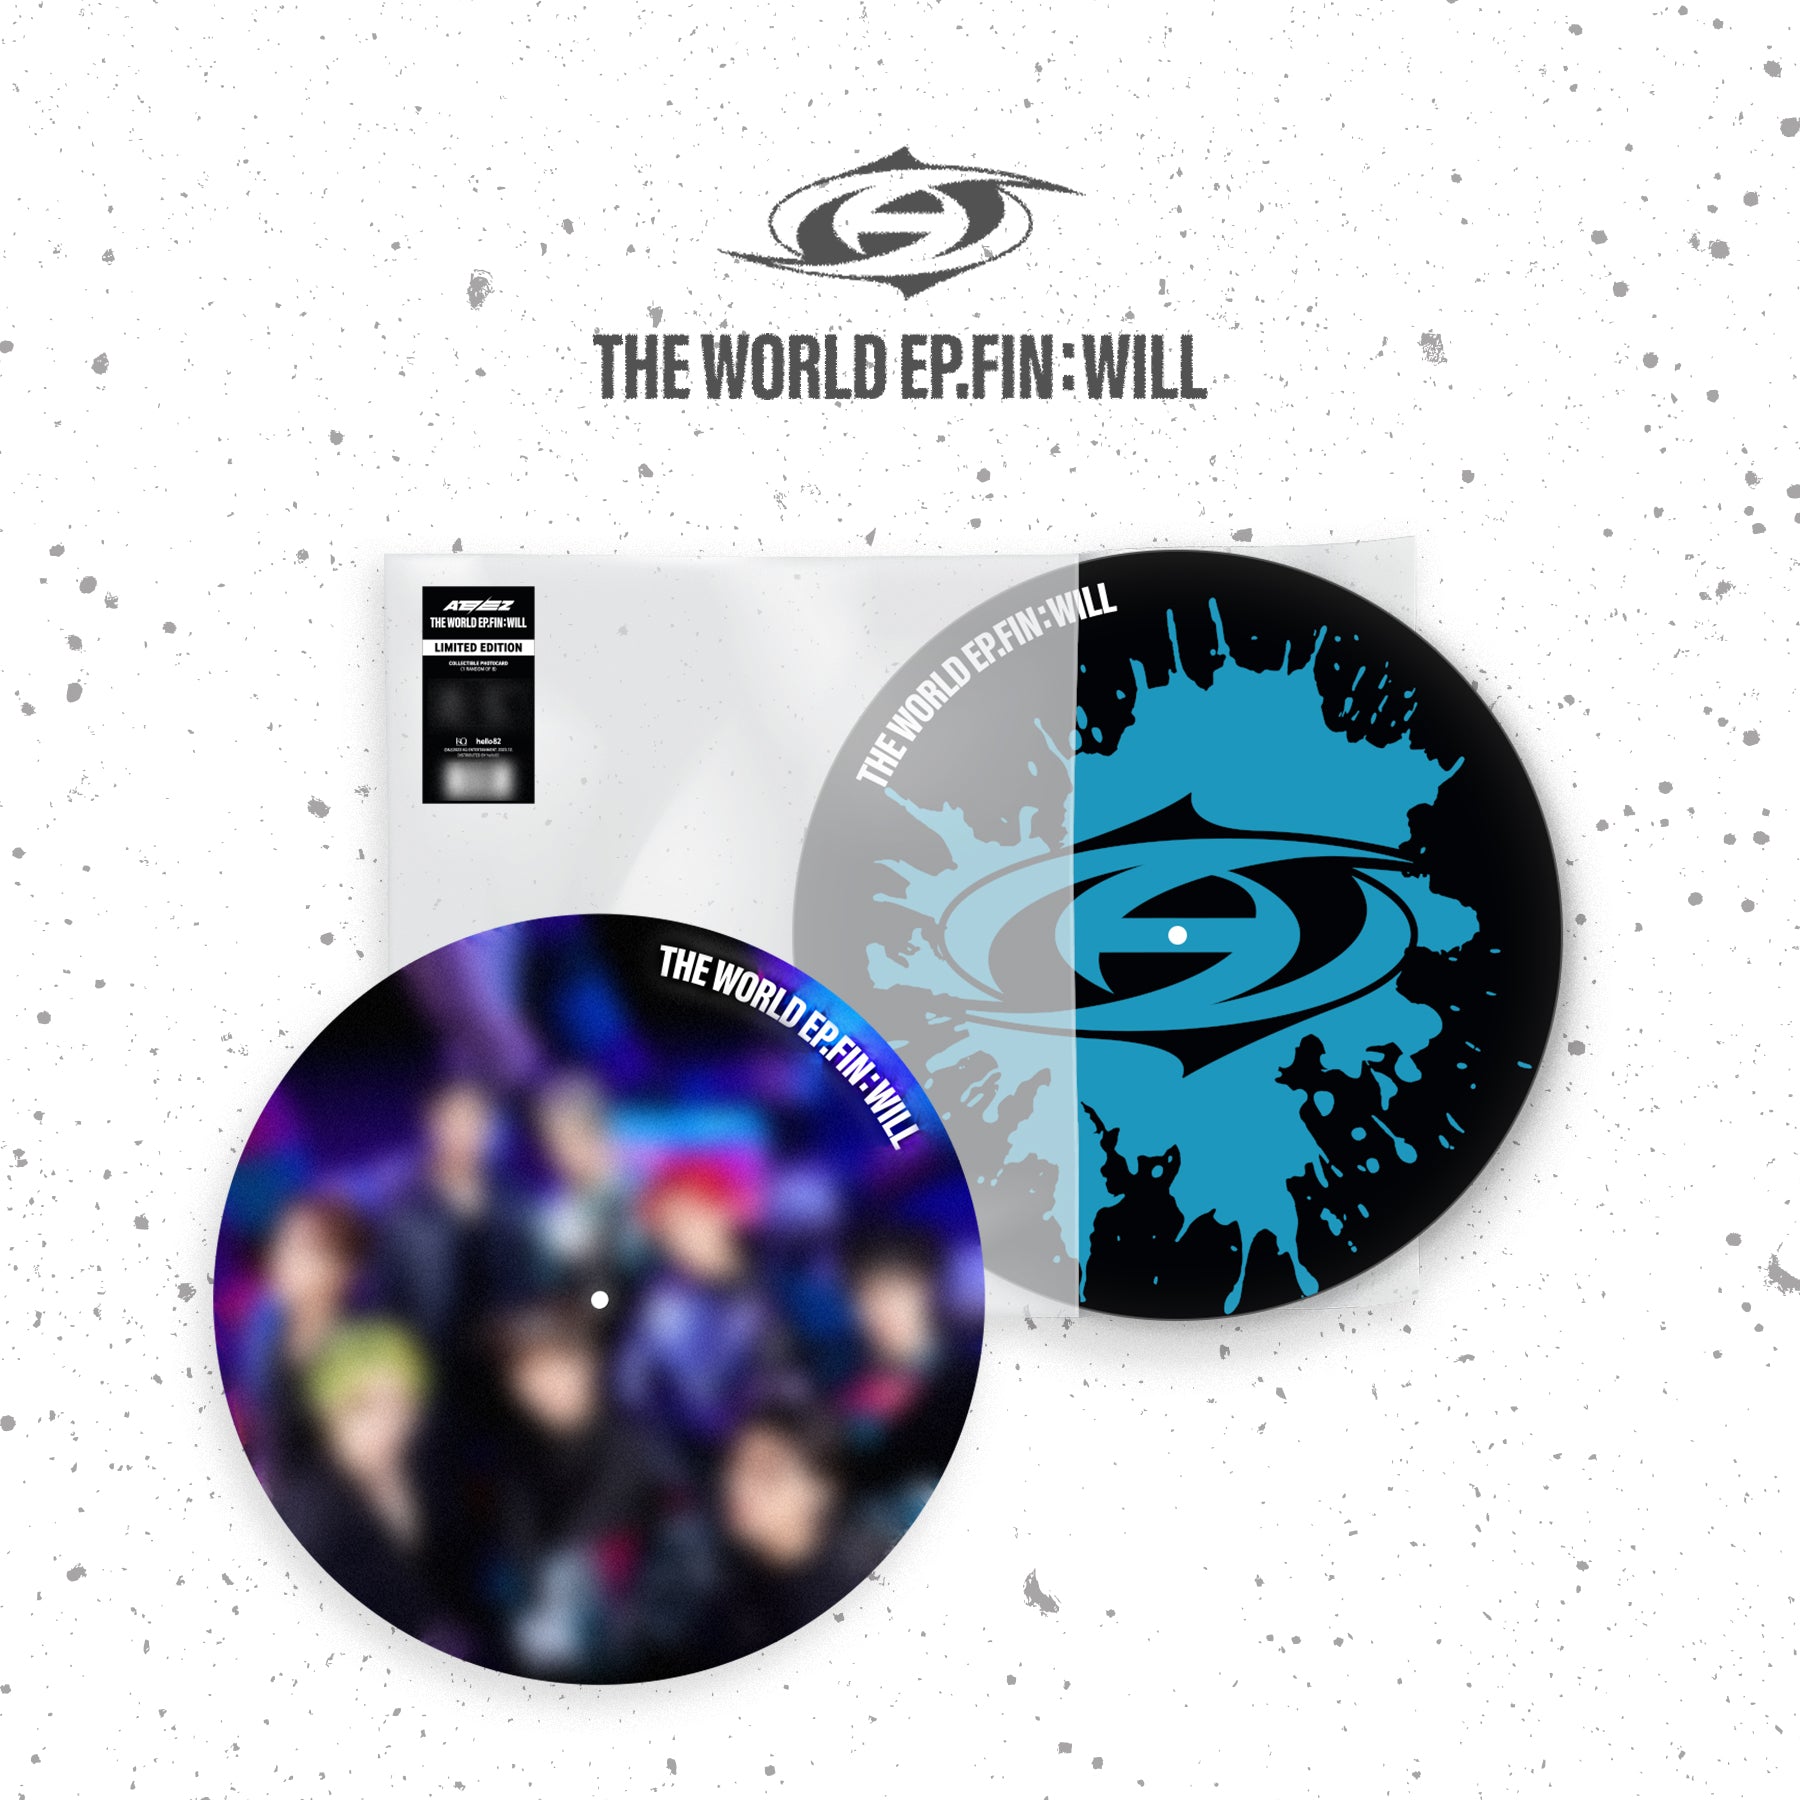 ATEEZ - THE WORLD EP.FIN : WILL  (Limited Edition Picture Disc Vinyl)